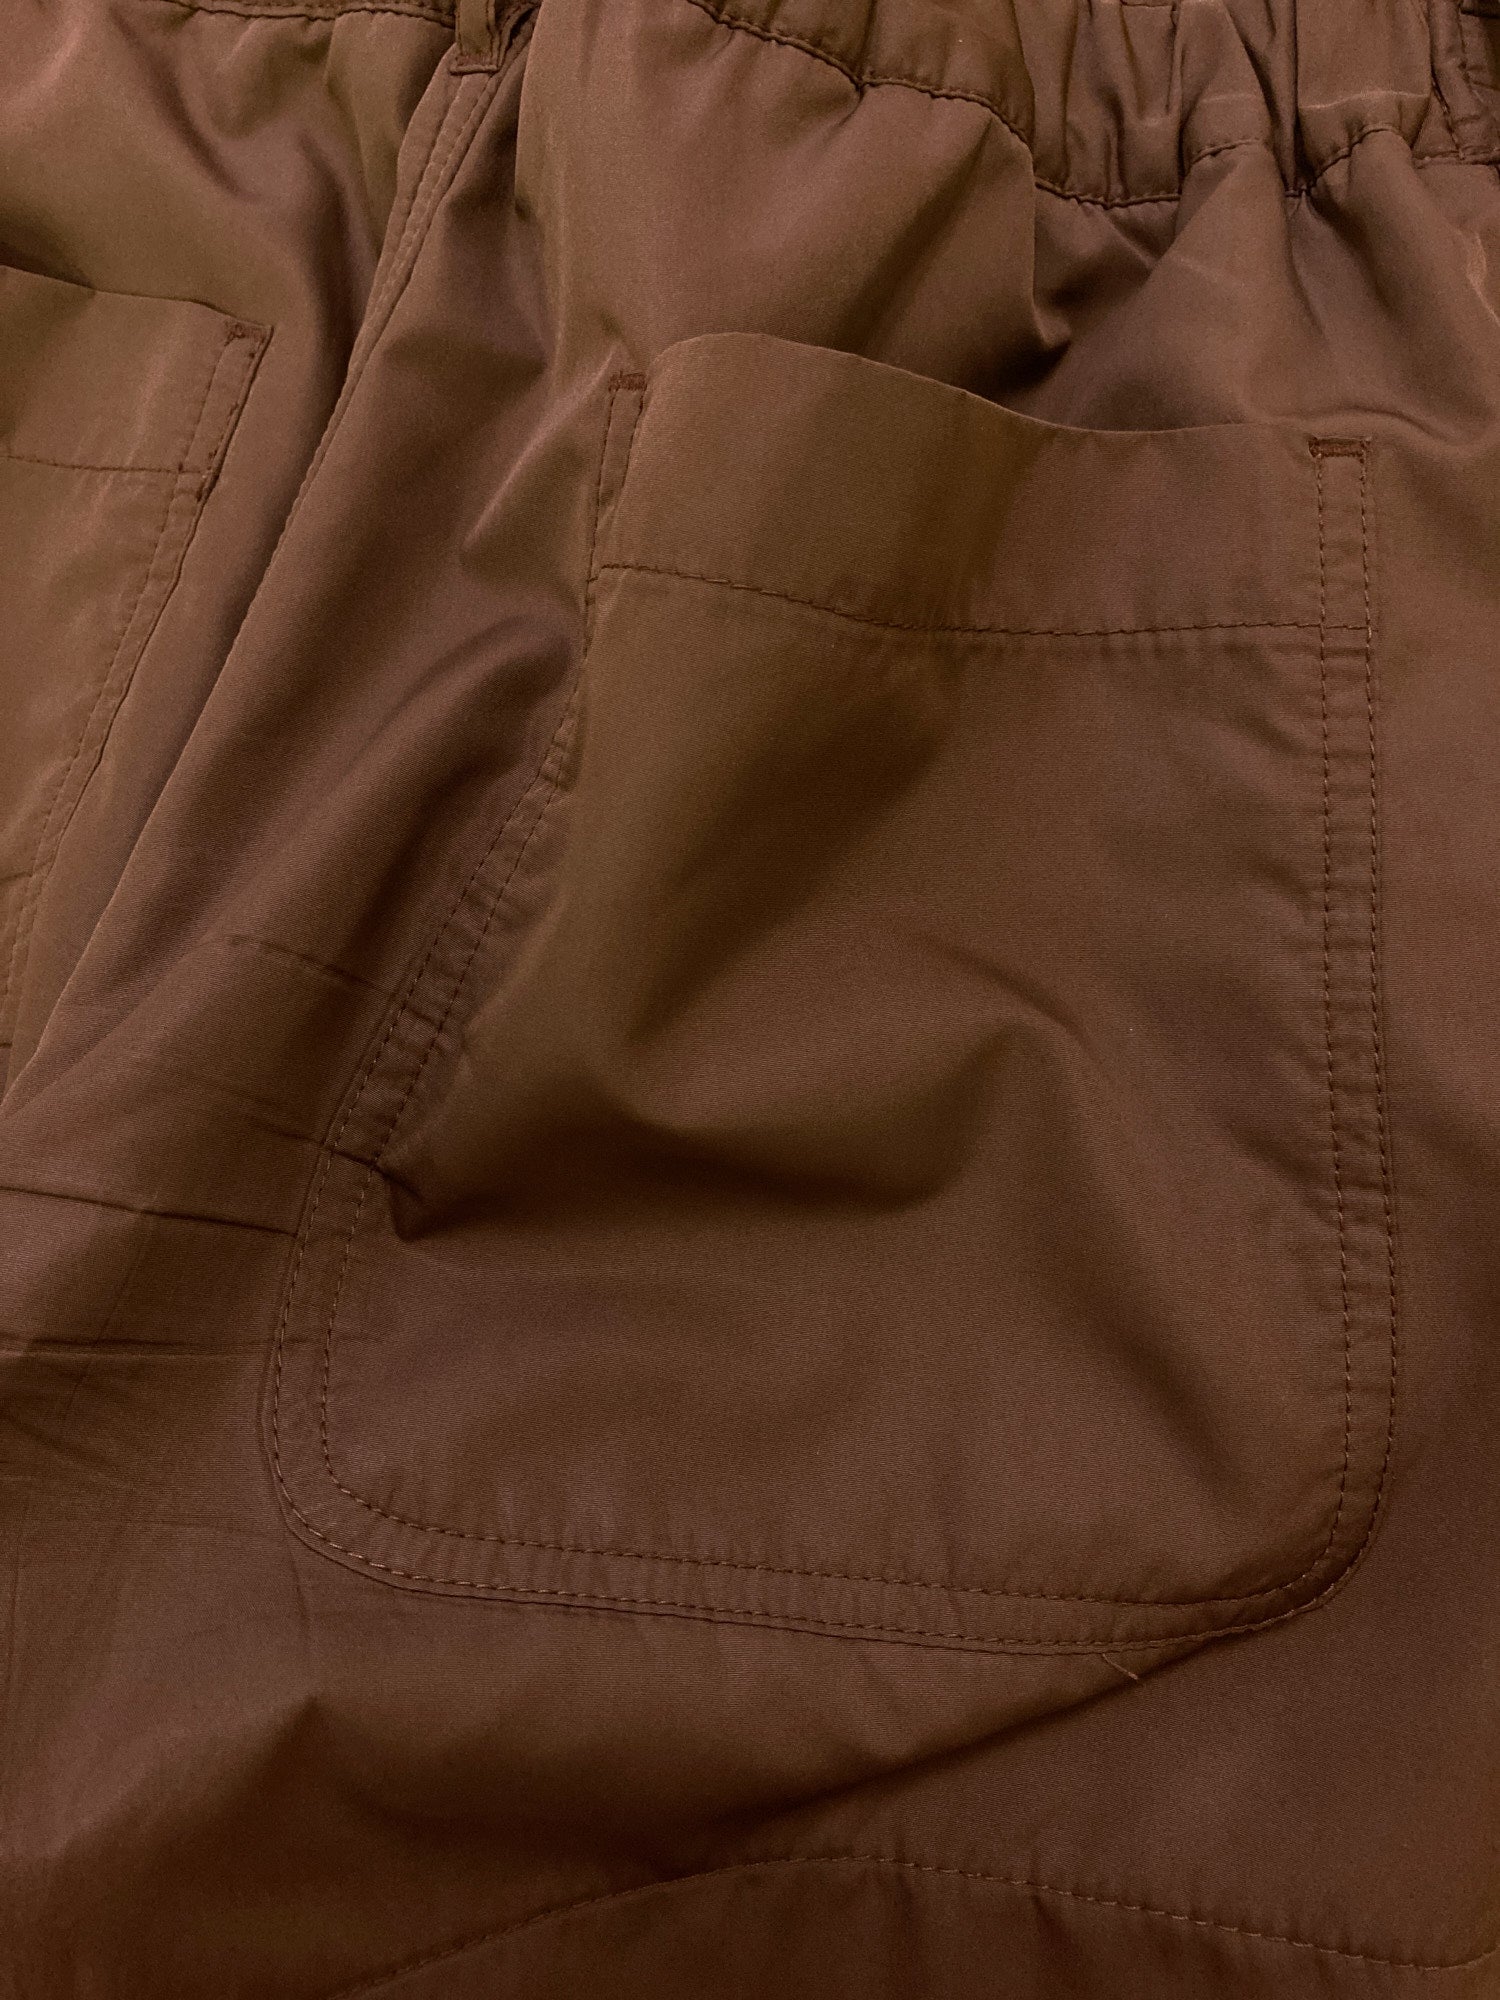 Comme des Garcons Homme Plus AW2005 brown trousers with orange fleece lining - M